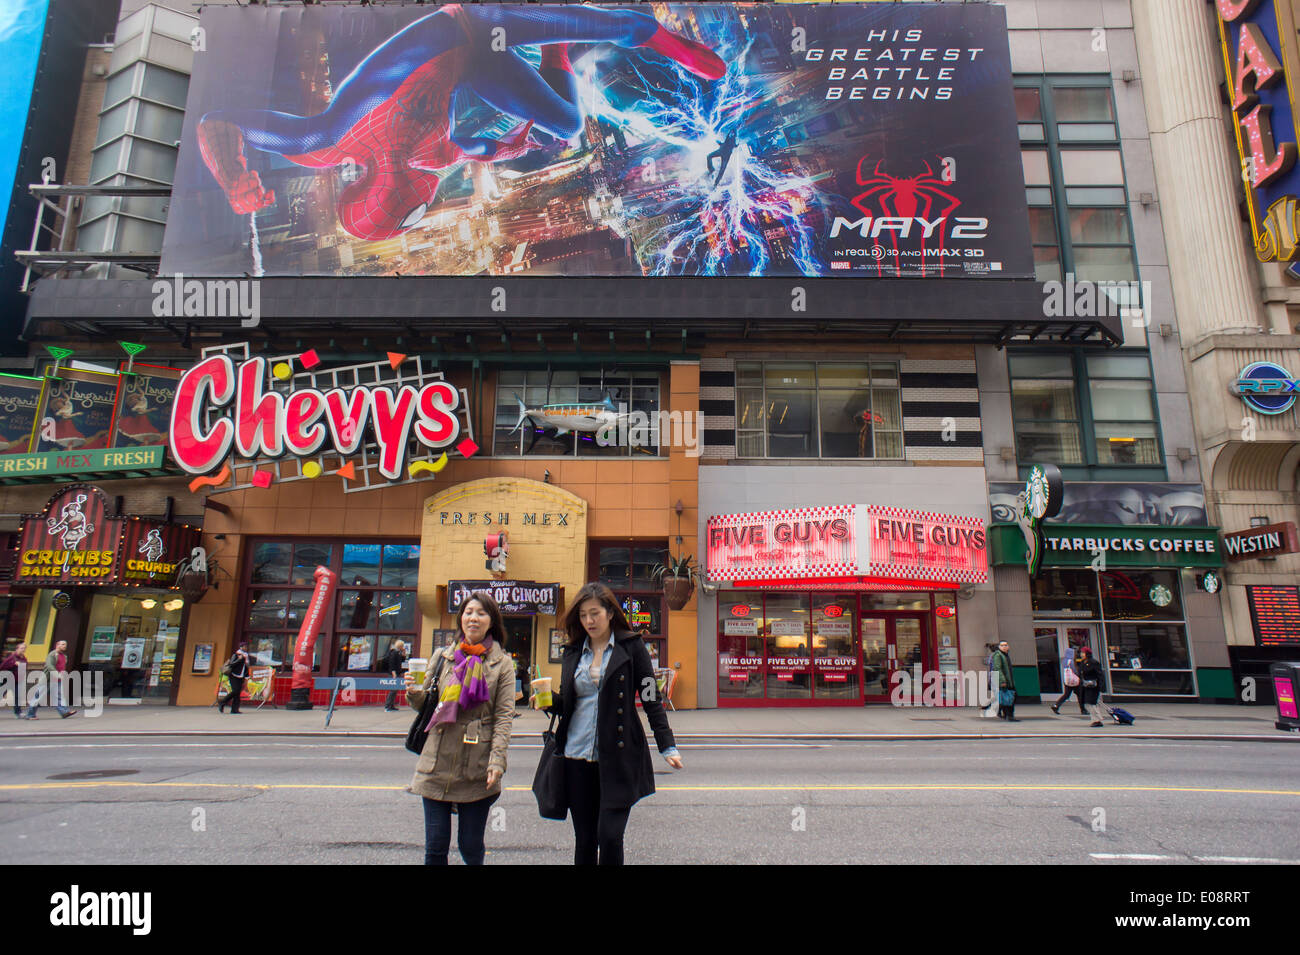 A poster advertising the ' Amazing Spider-Man 2' film is seen in Times Square in New York Stock Photo